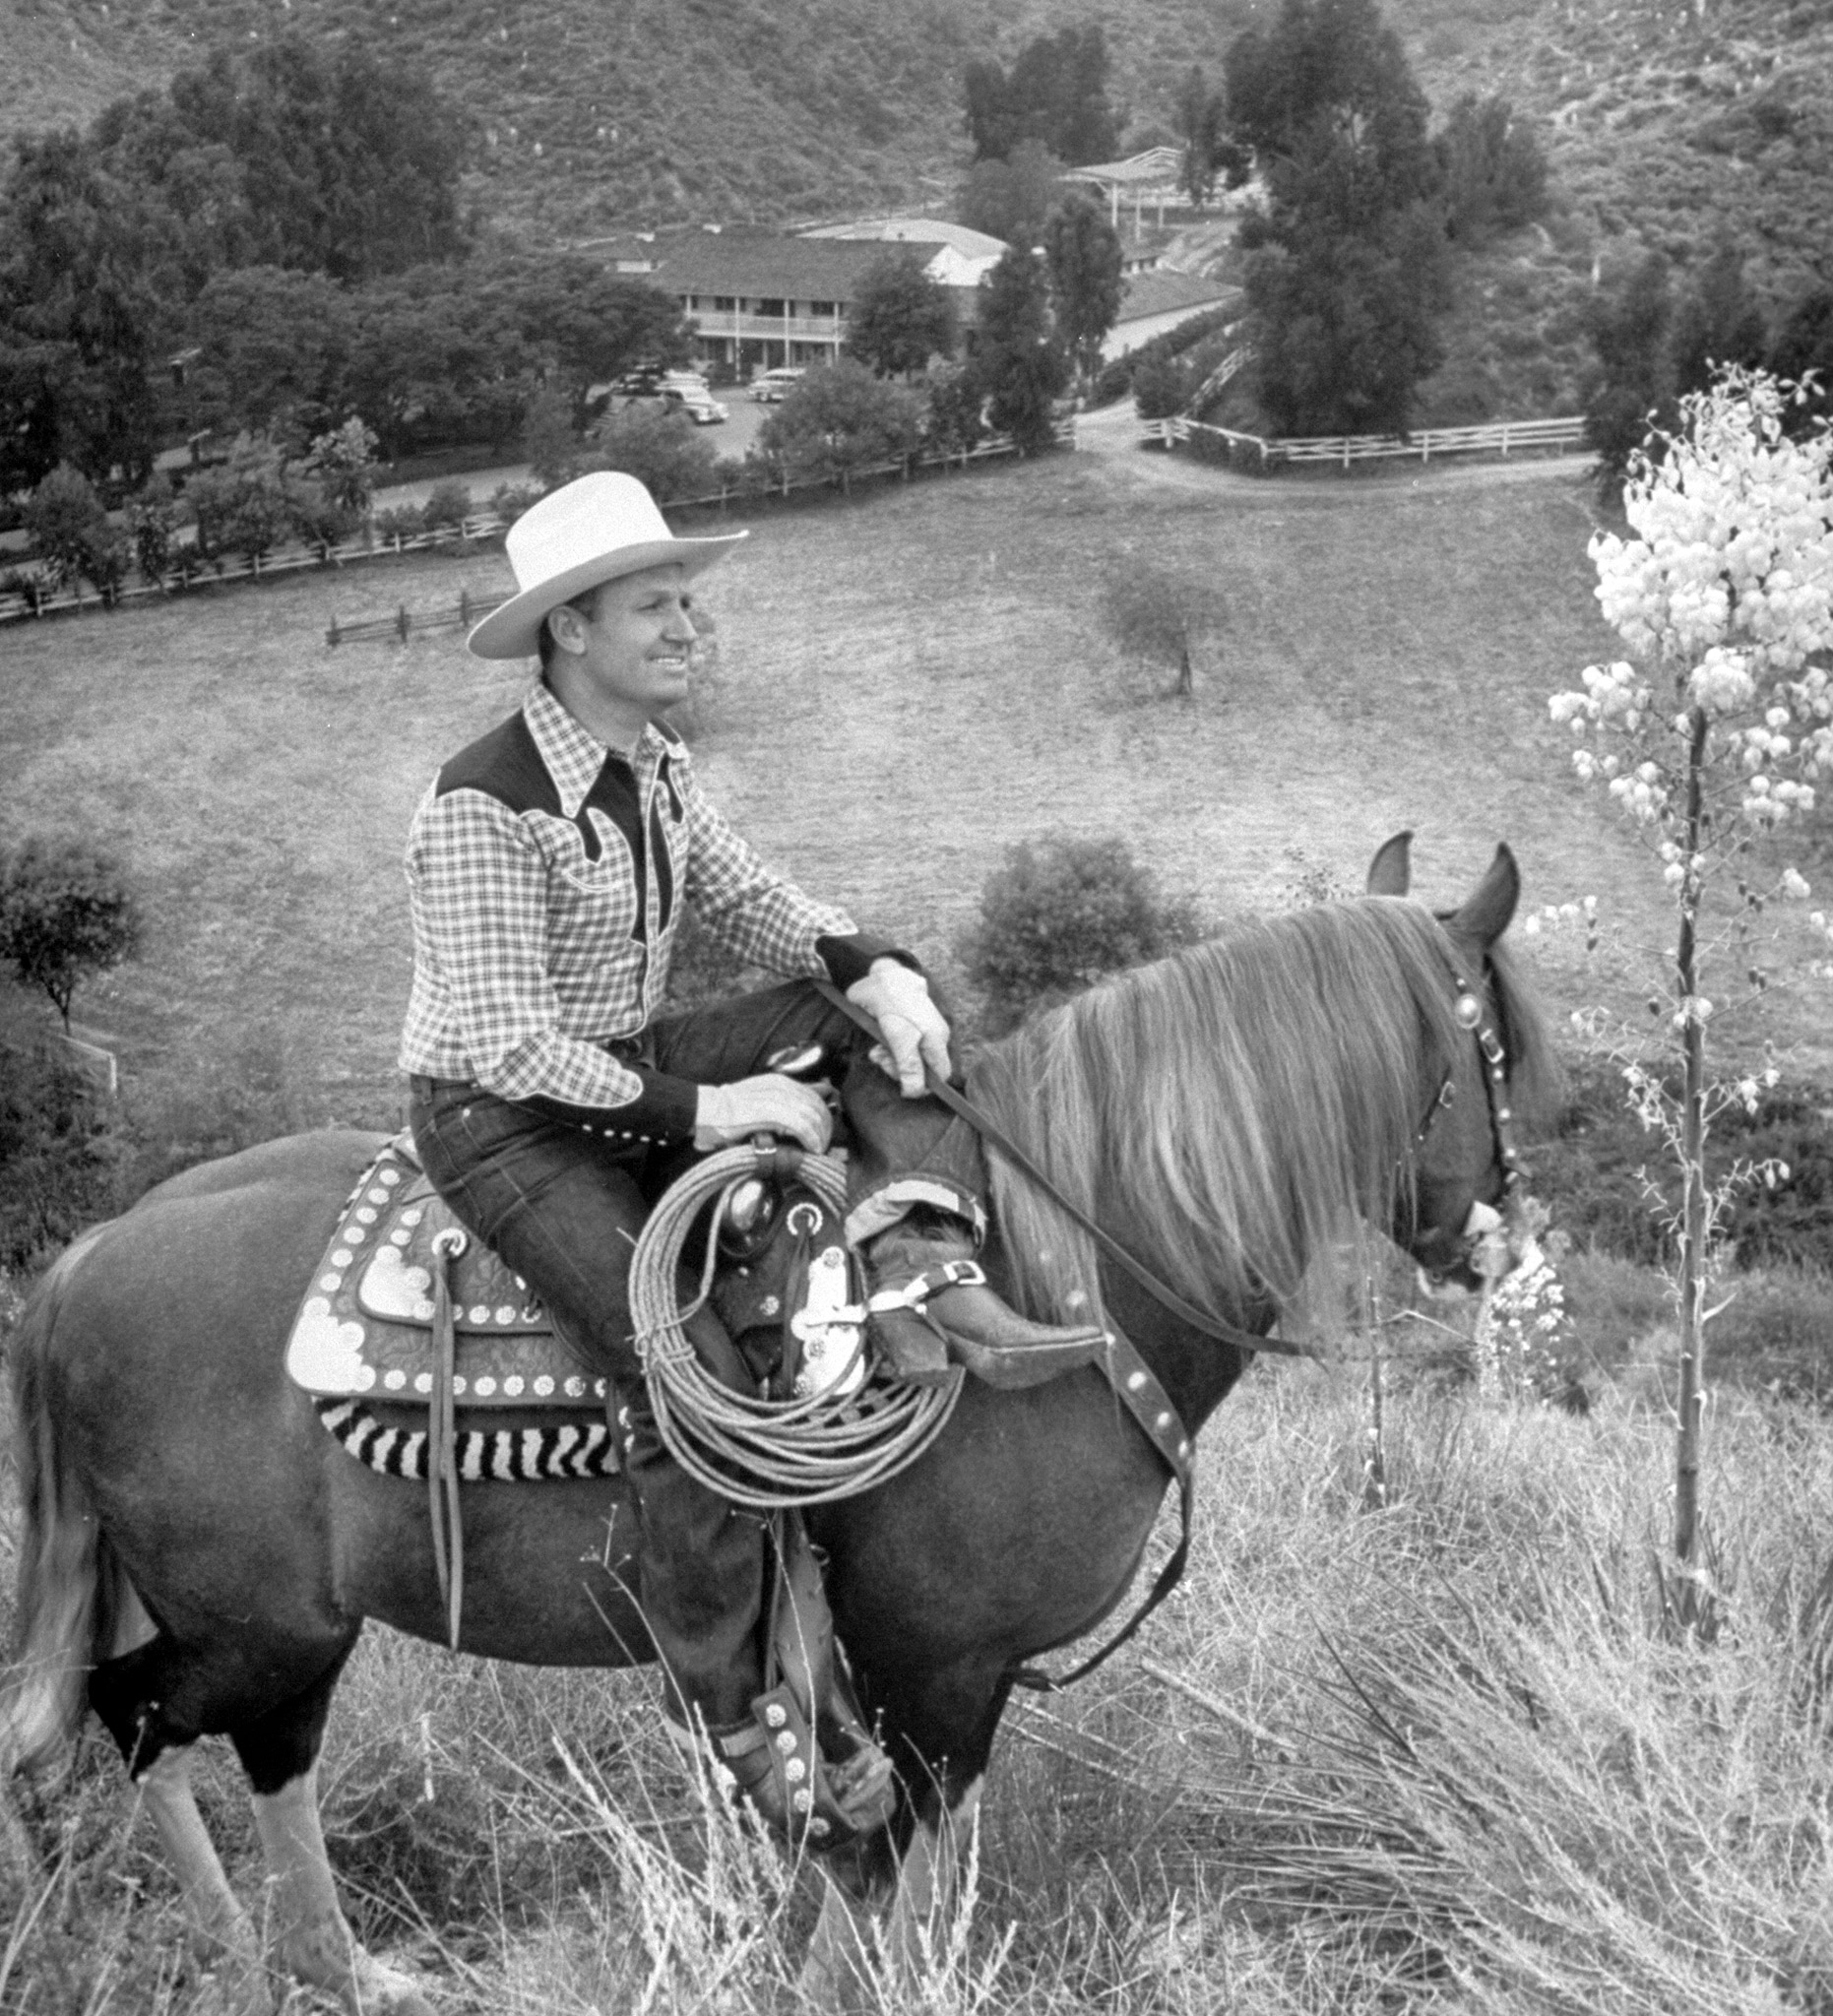 Gene Autry astride his horse Champion surveying his Ranch, 1948.